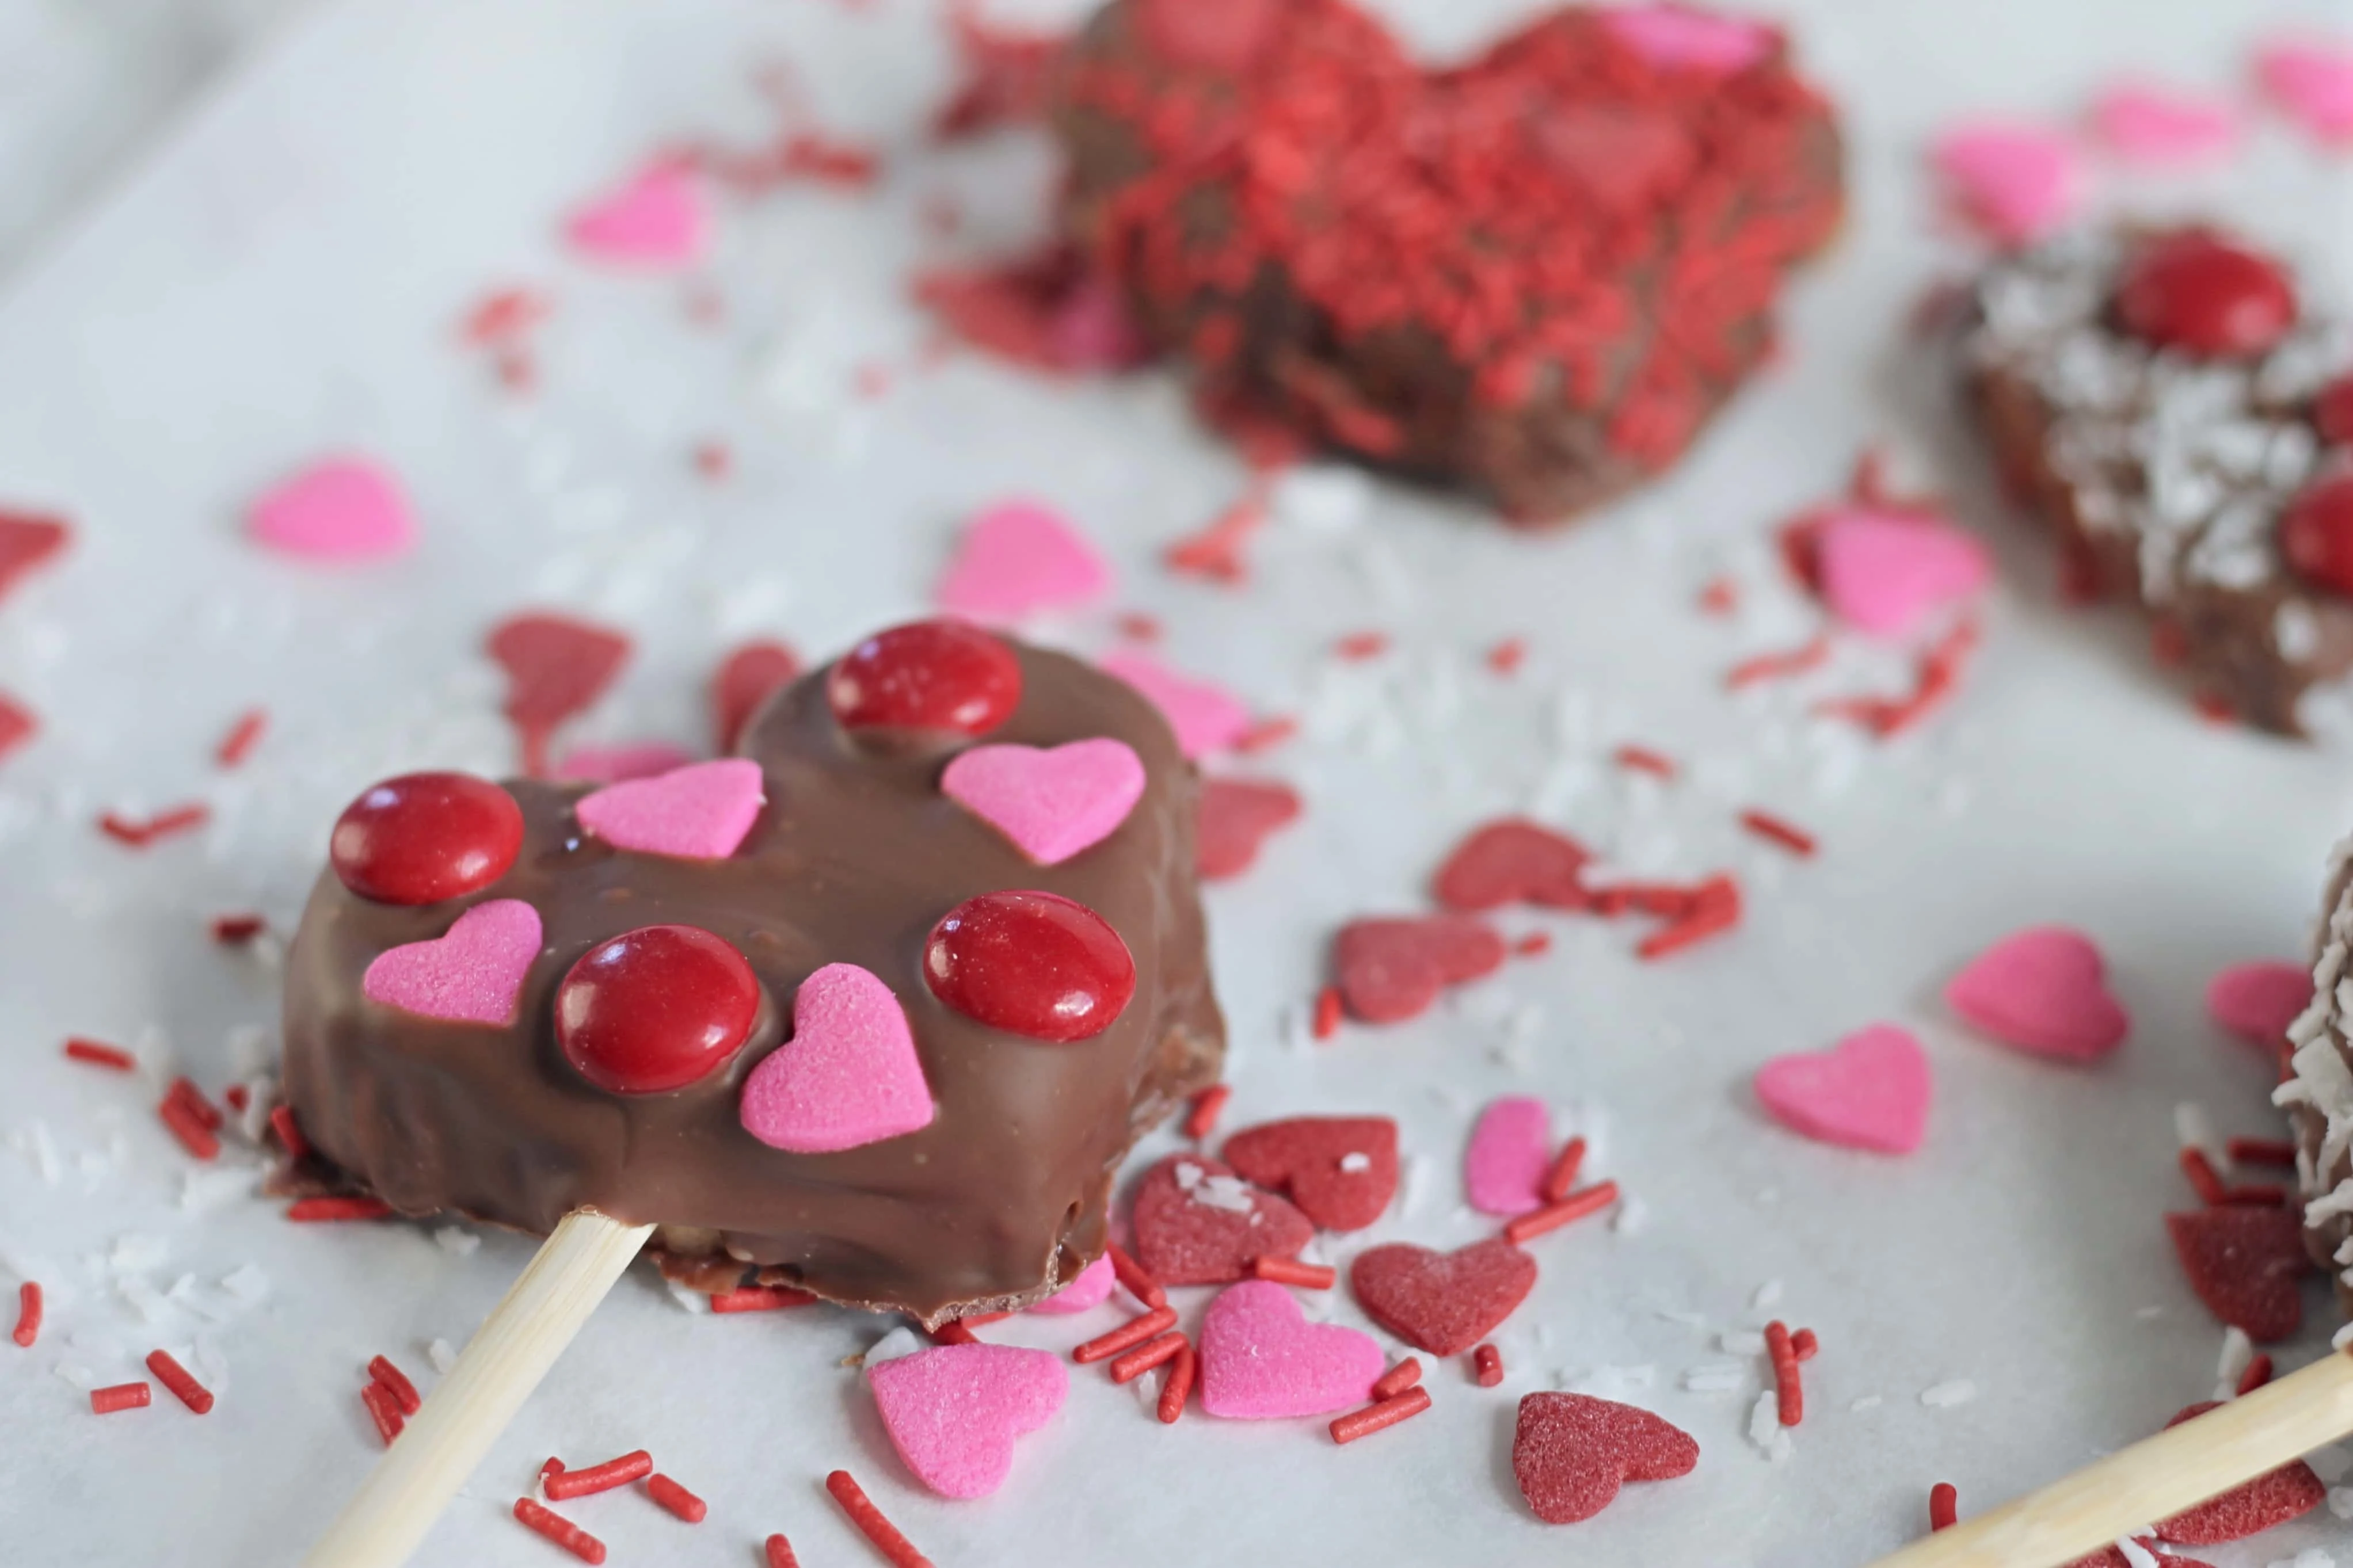 Chocolate Dipped Apple Hearts with heart sprinkles and candy coated chocolate